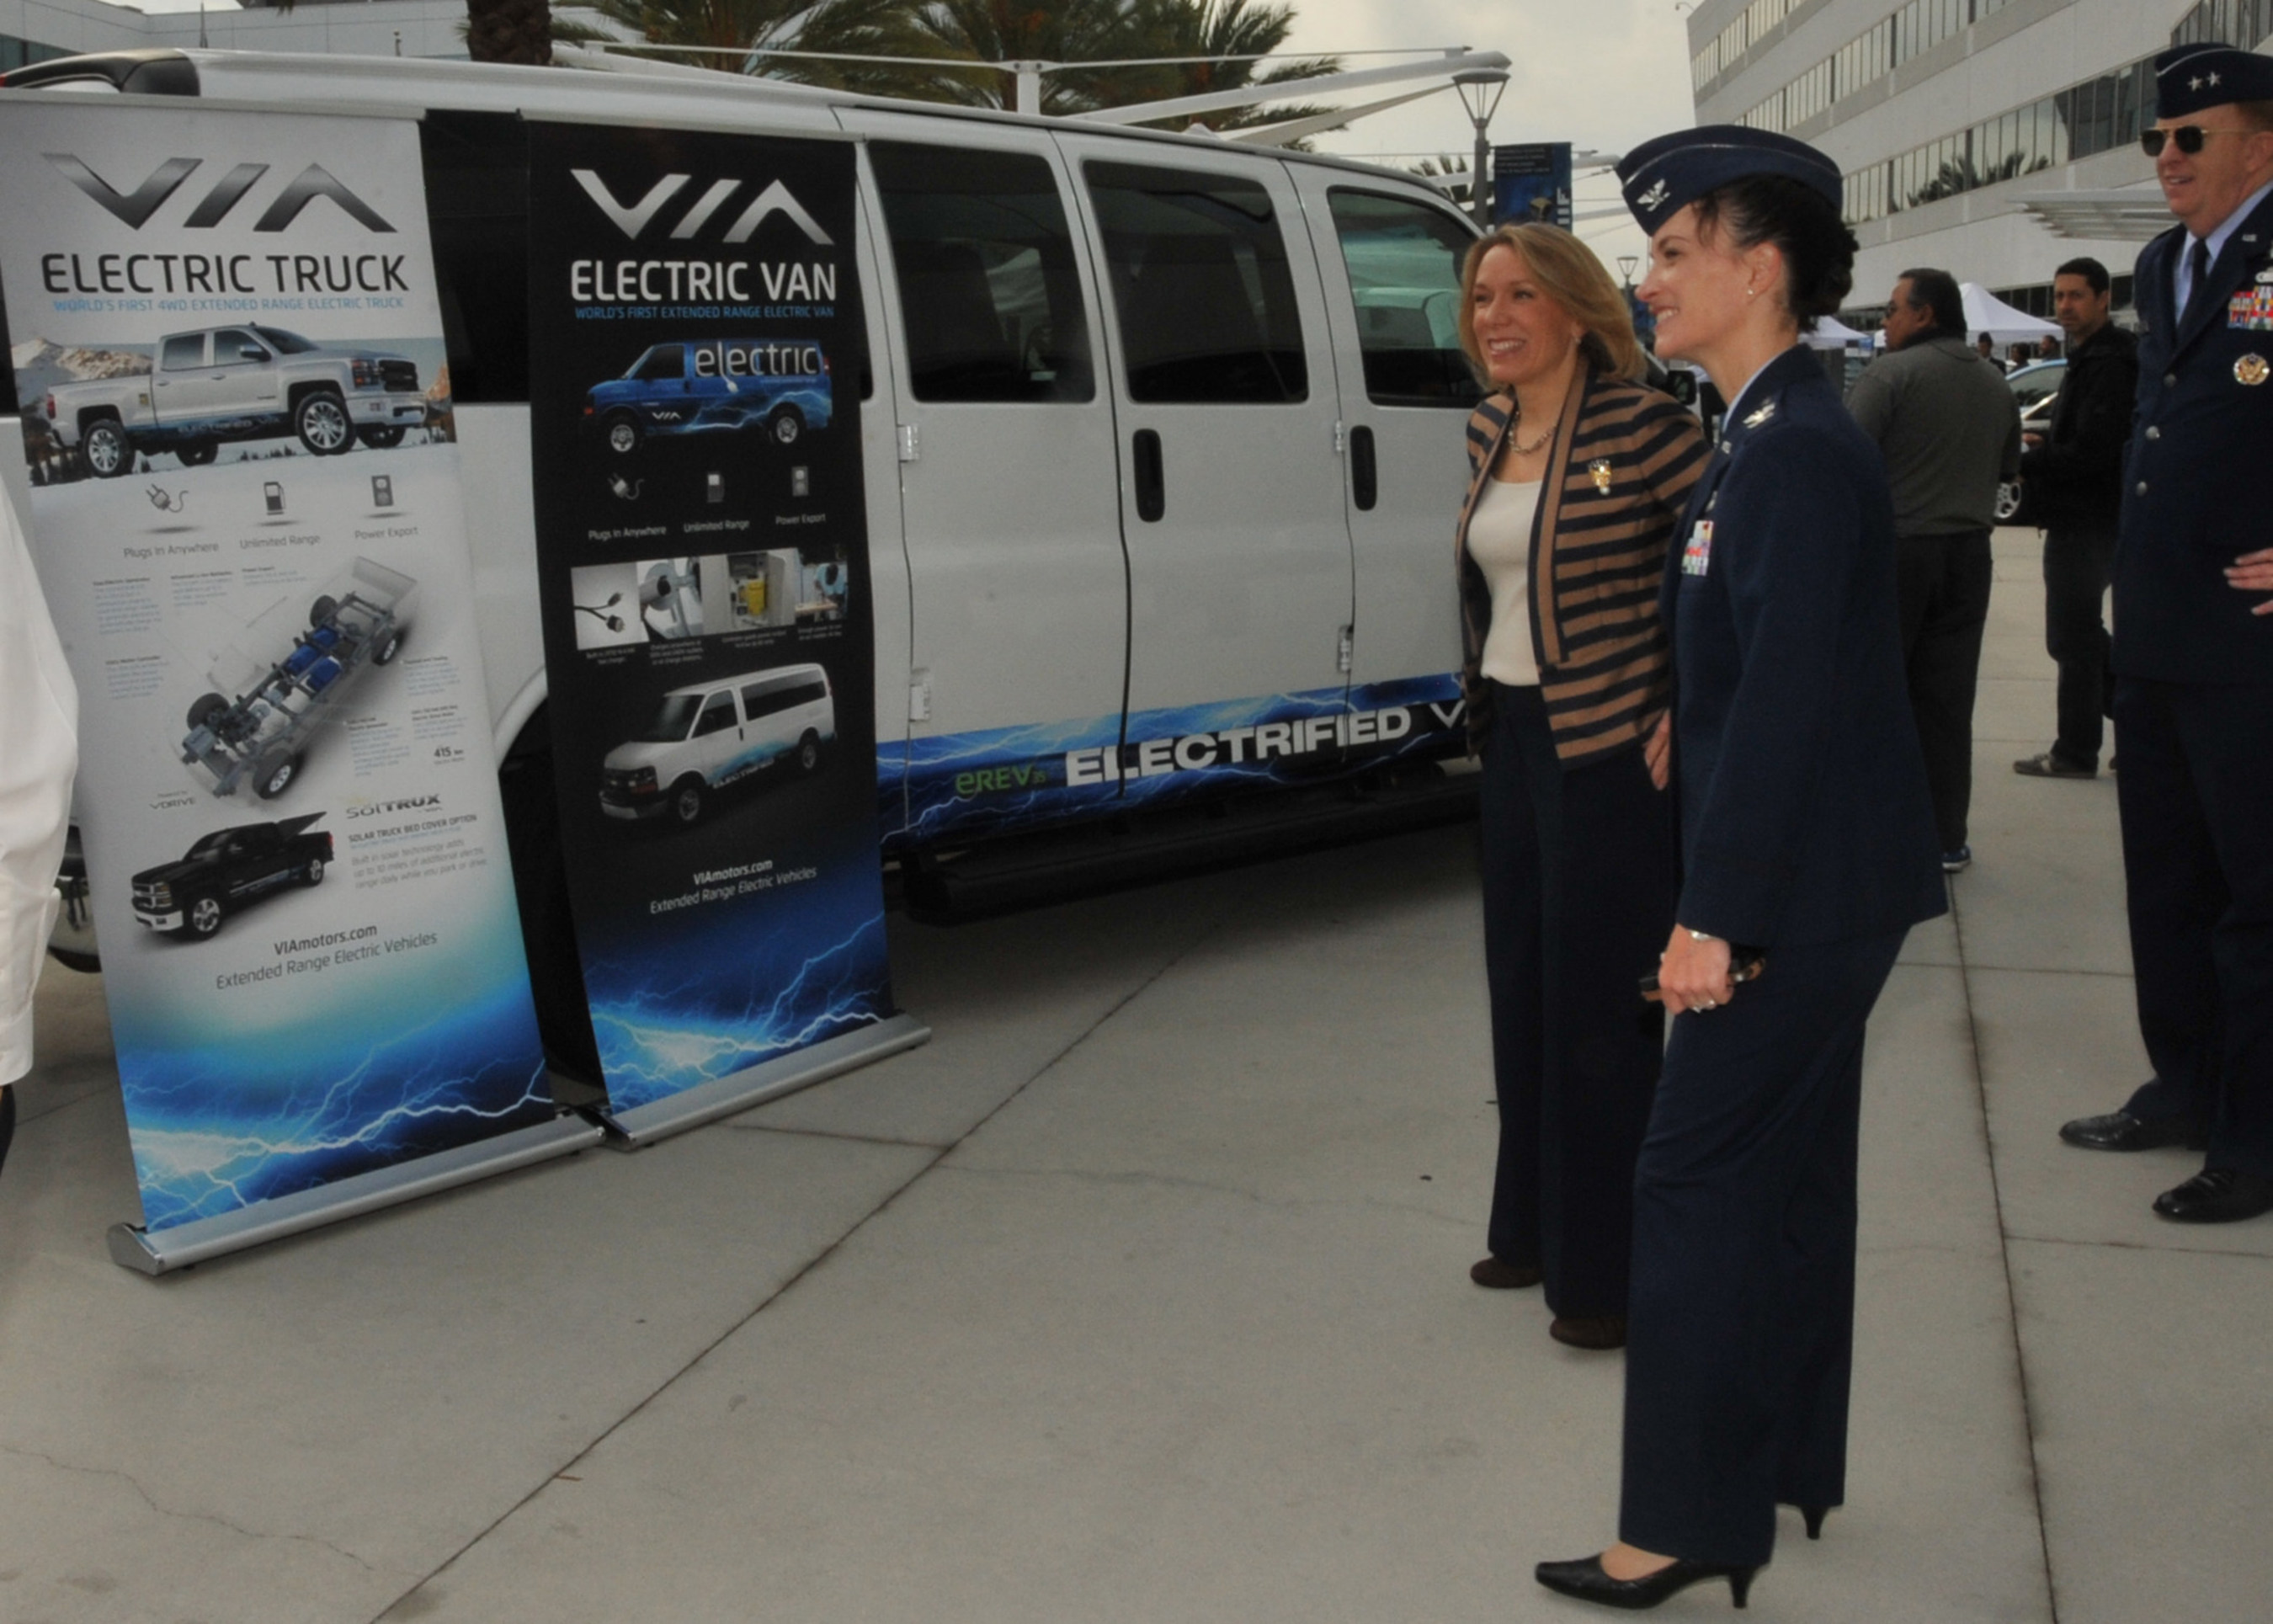 Assistant Secretary of the Air Force for Installations, Environment, and Energy Miranda A.A. Ballentine visits the Space and Missile Systems Center plug-in electric vehicle fleet unveiling at Los Angeles Air Force Base on Nov 14, 2014 with hosts SMC Vice Commander Maj. Gen. Robert McMurry and 61st Air Base Group commander Col. Donna Turner (pictured on right).  The all-electric/hybrid fleet is the first of its kind in the Dept. of Defense and will serve as a year-long test for expansion throughout the DoD.  (U.S. Air Force photo by Sarah Corrice)